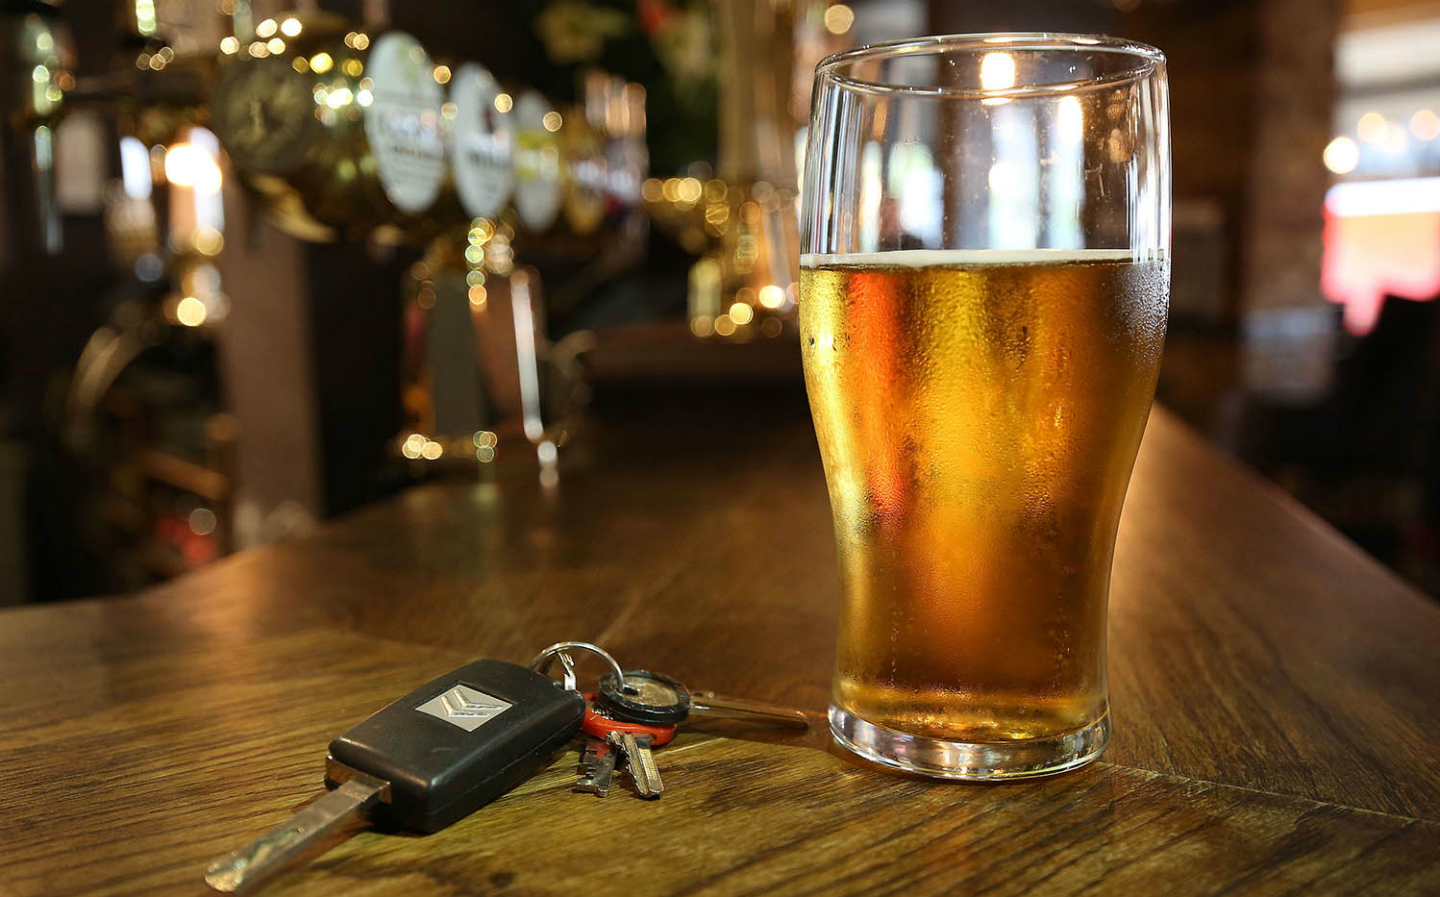 One in six drivers admits being over alcohol limit, RAC figures suggest